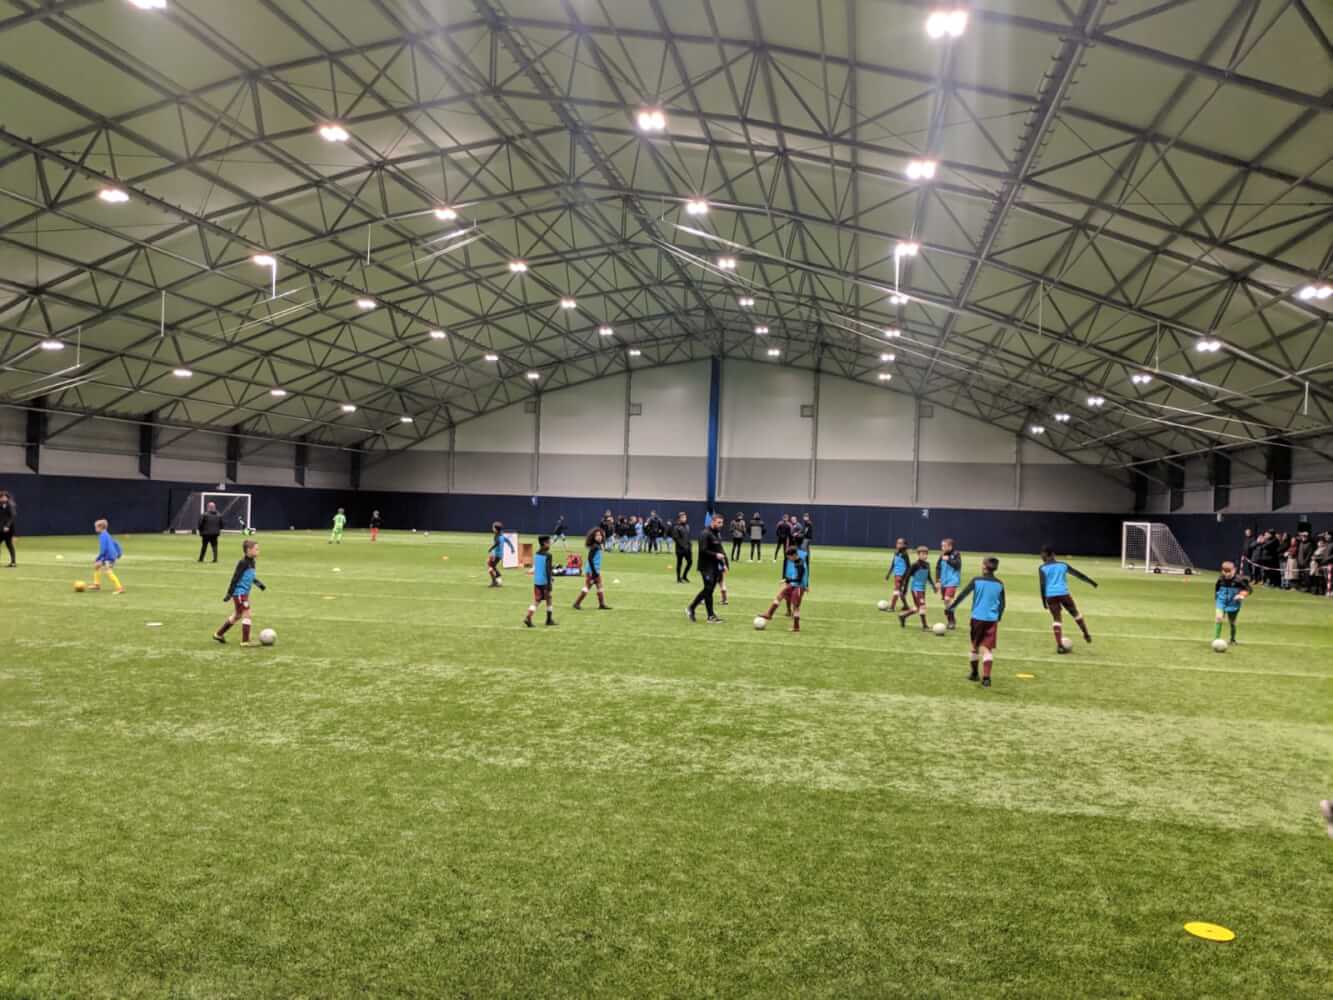 Indoor football at the alan higgs centre.